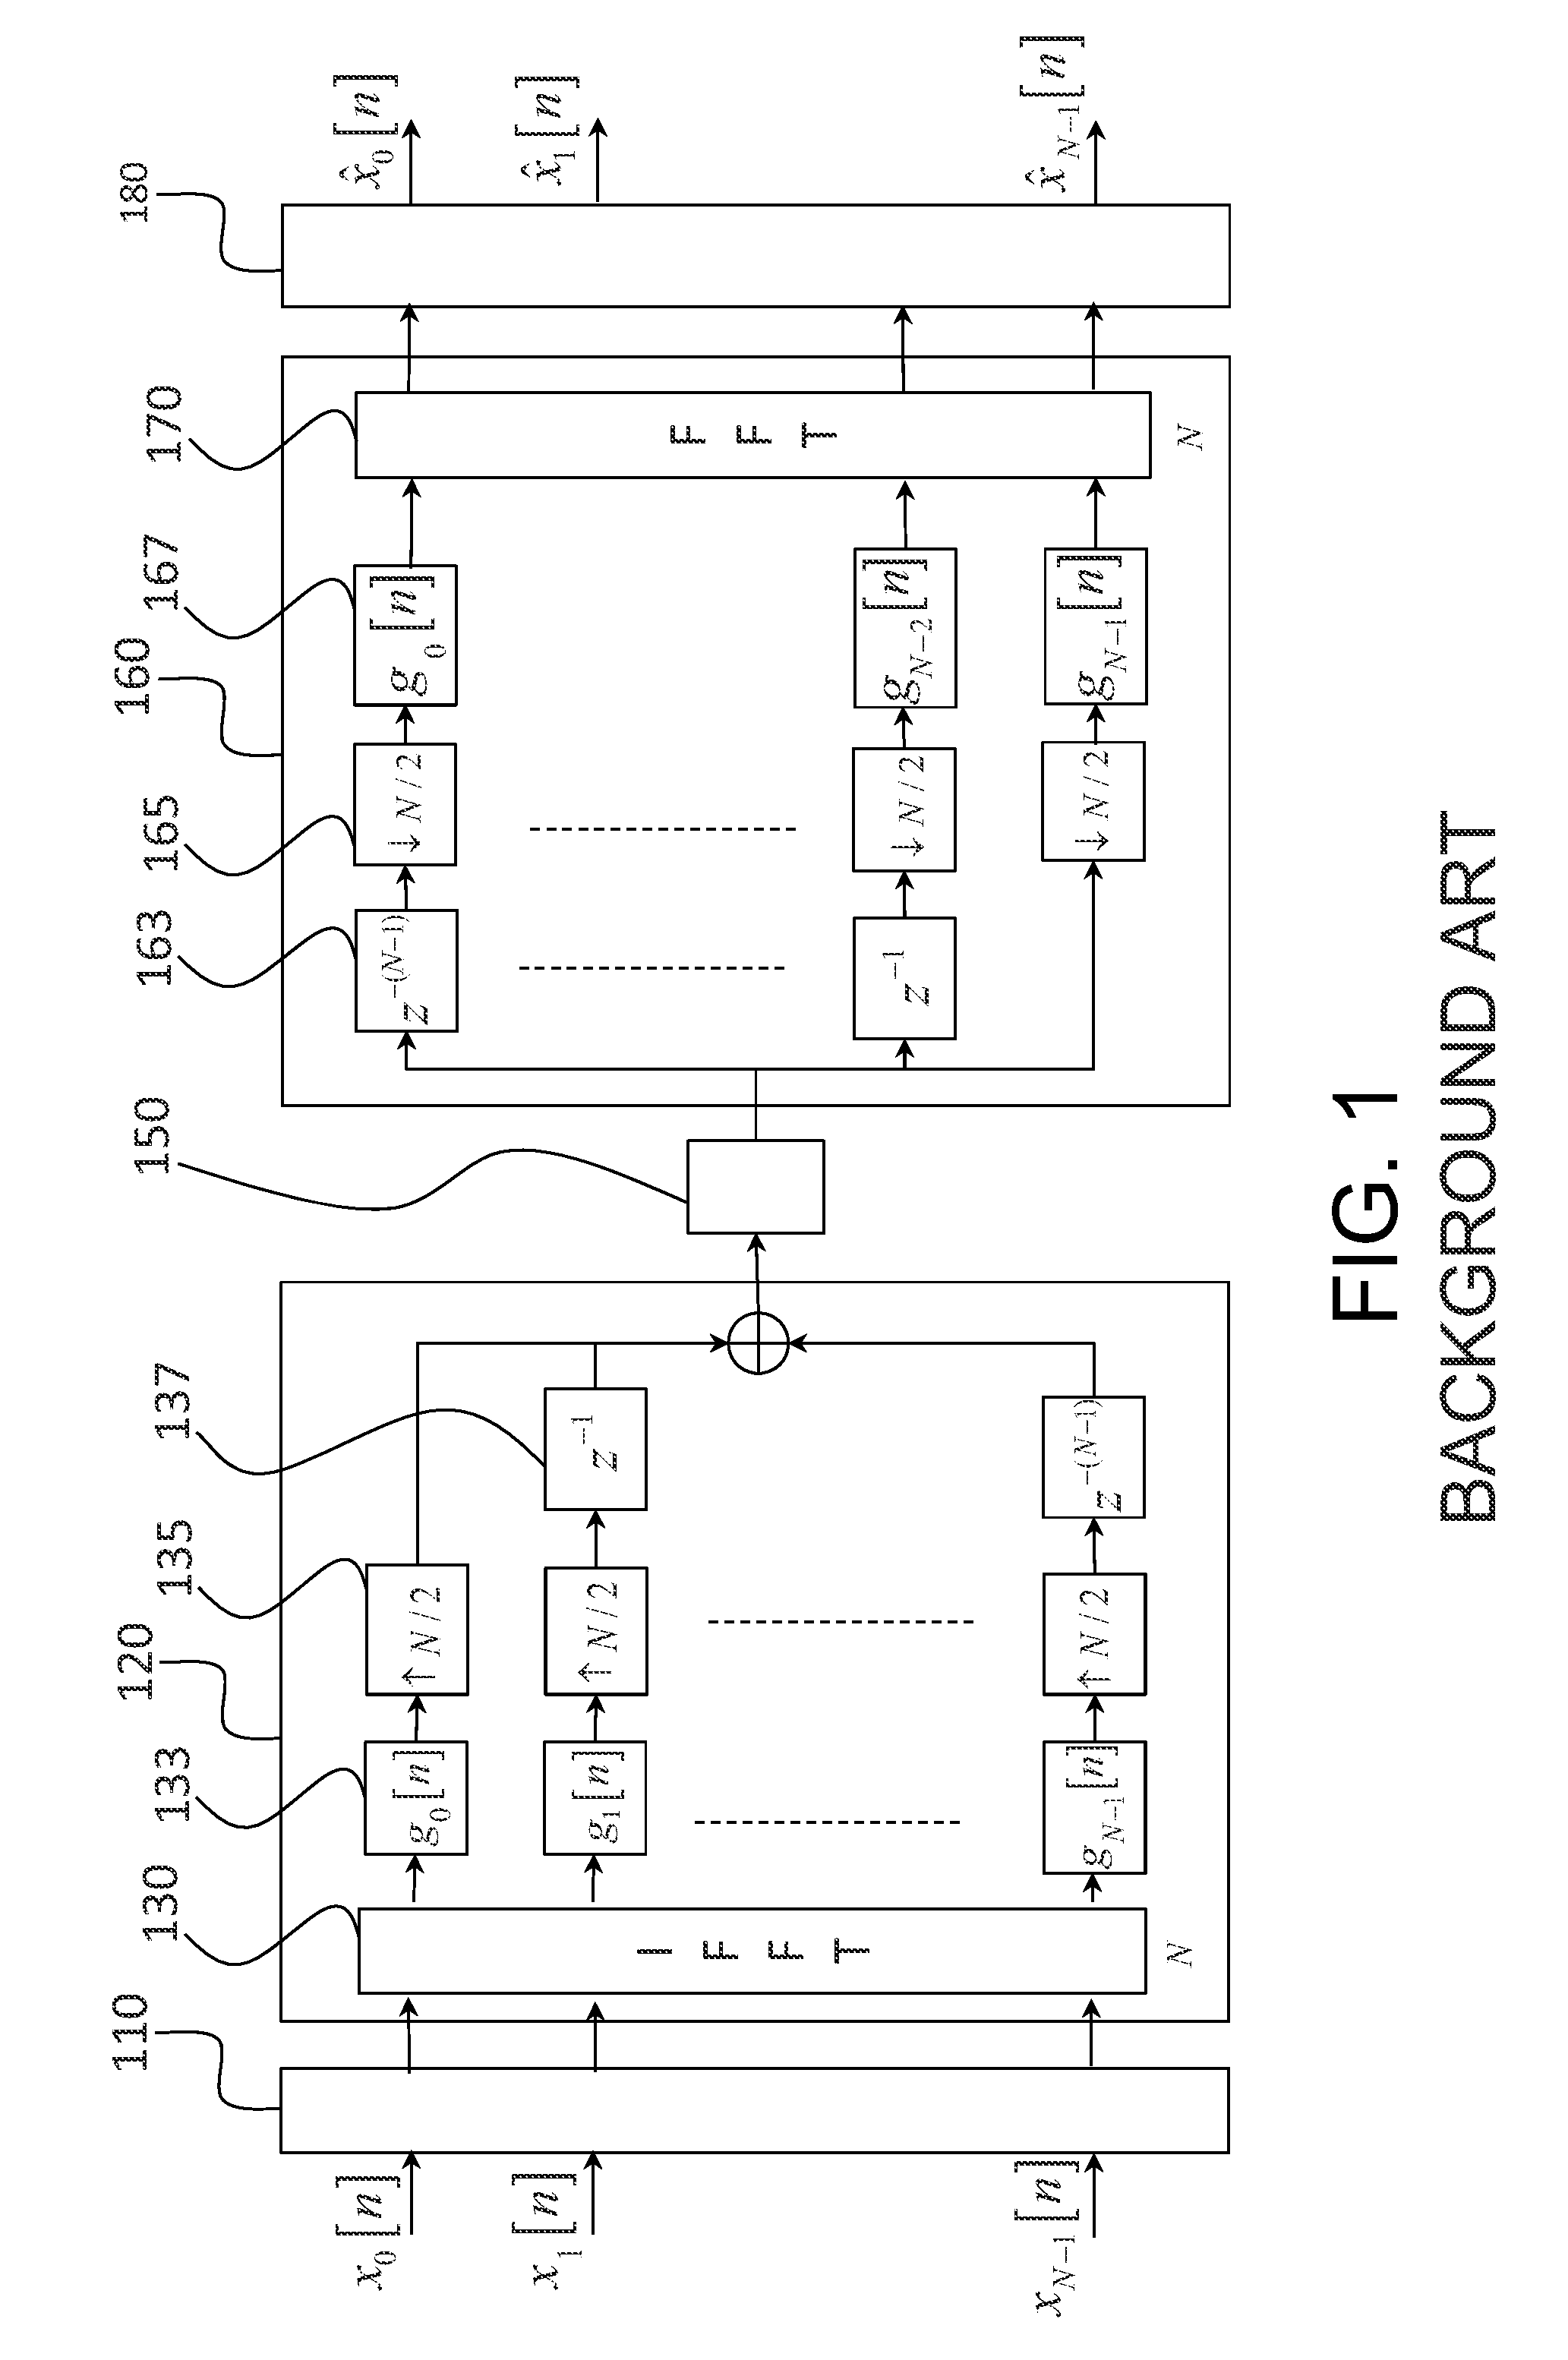 FBMC receiver with carrier frequency offset compensation